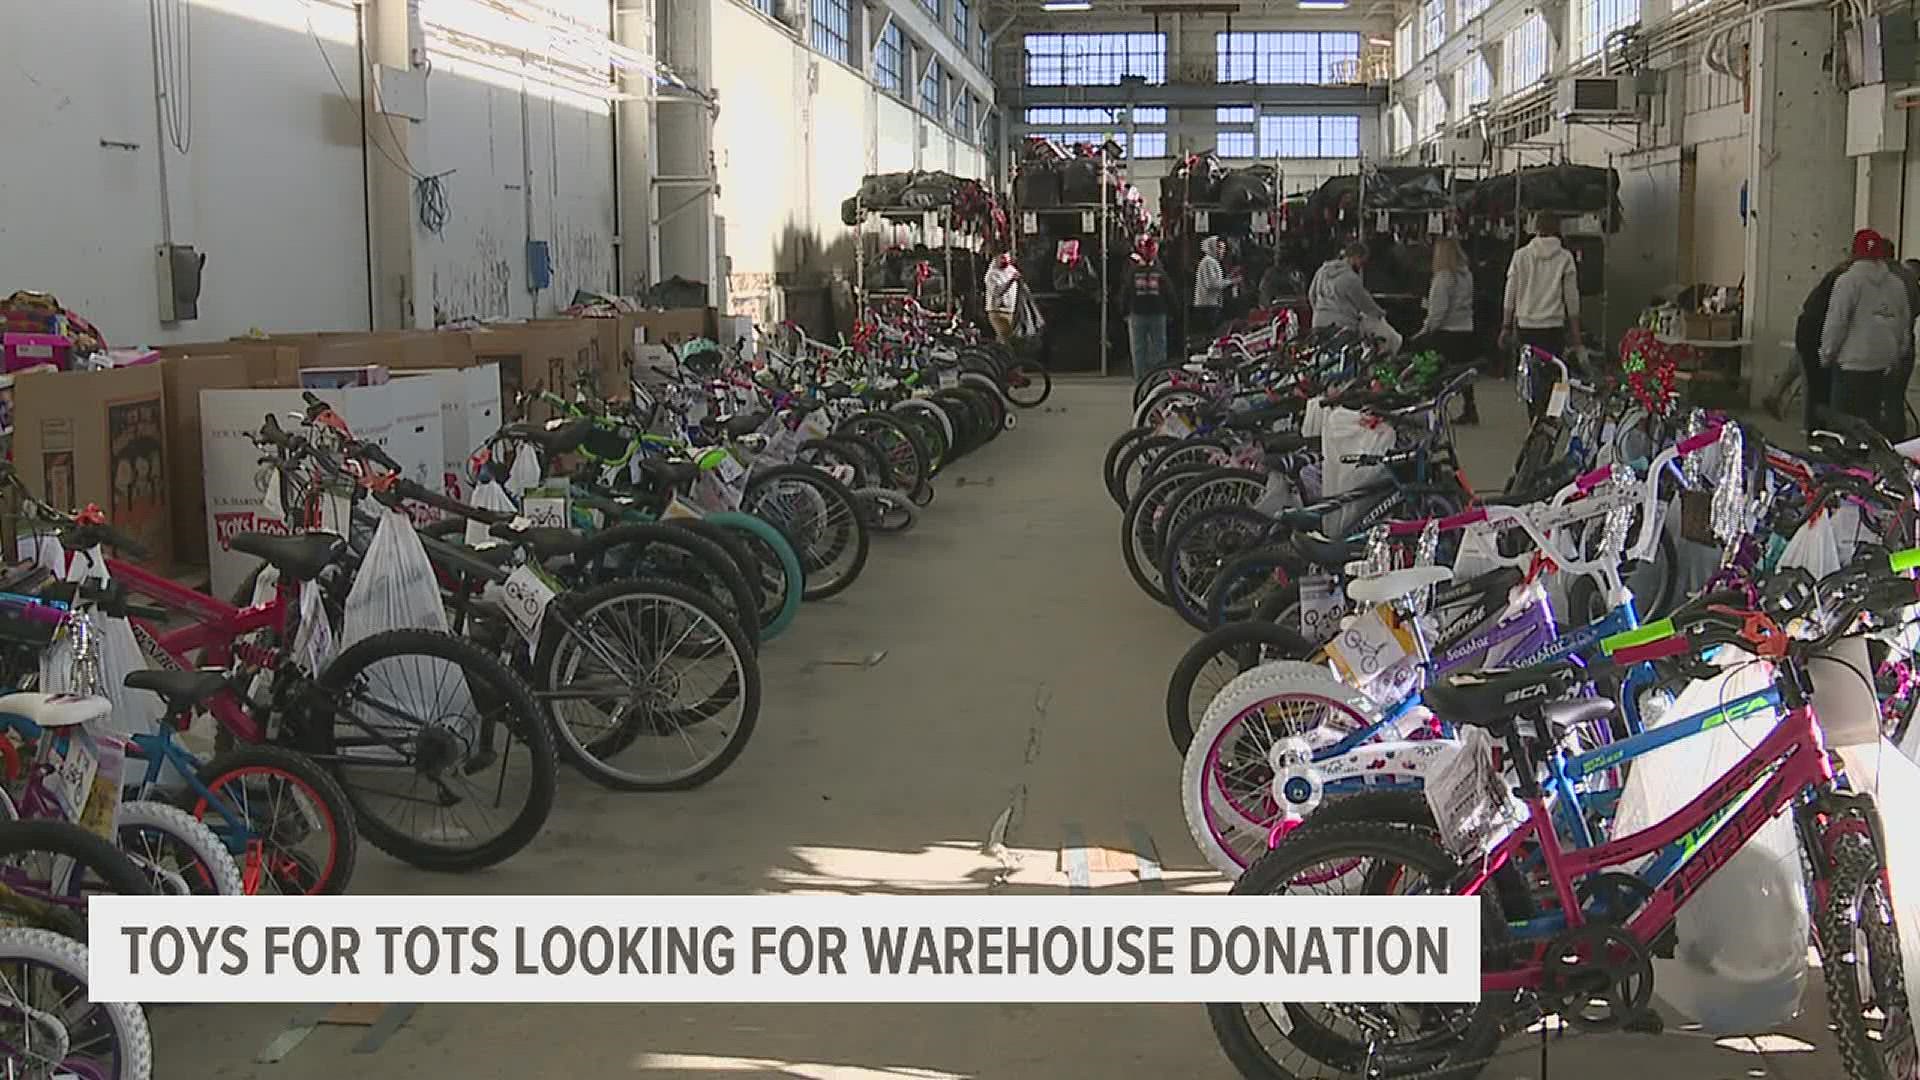 The Marines are looking for a temporary location to be donated this year. They use the warehouse as their headquarters to store and distribute toys.